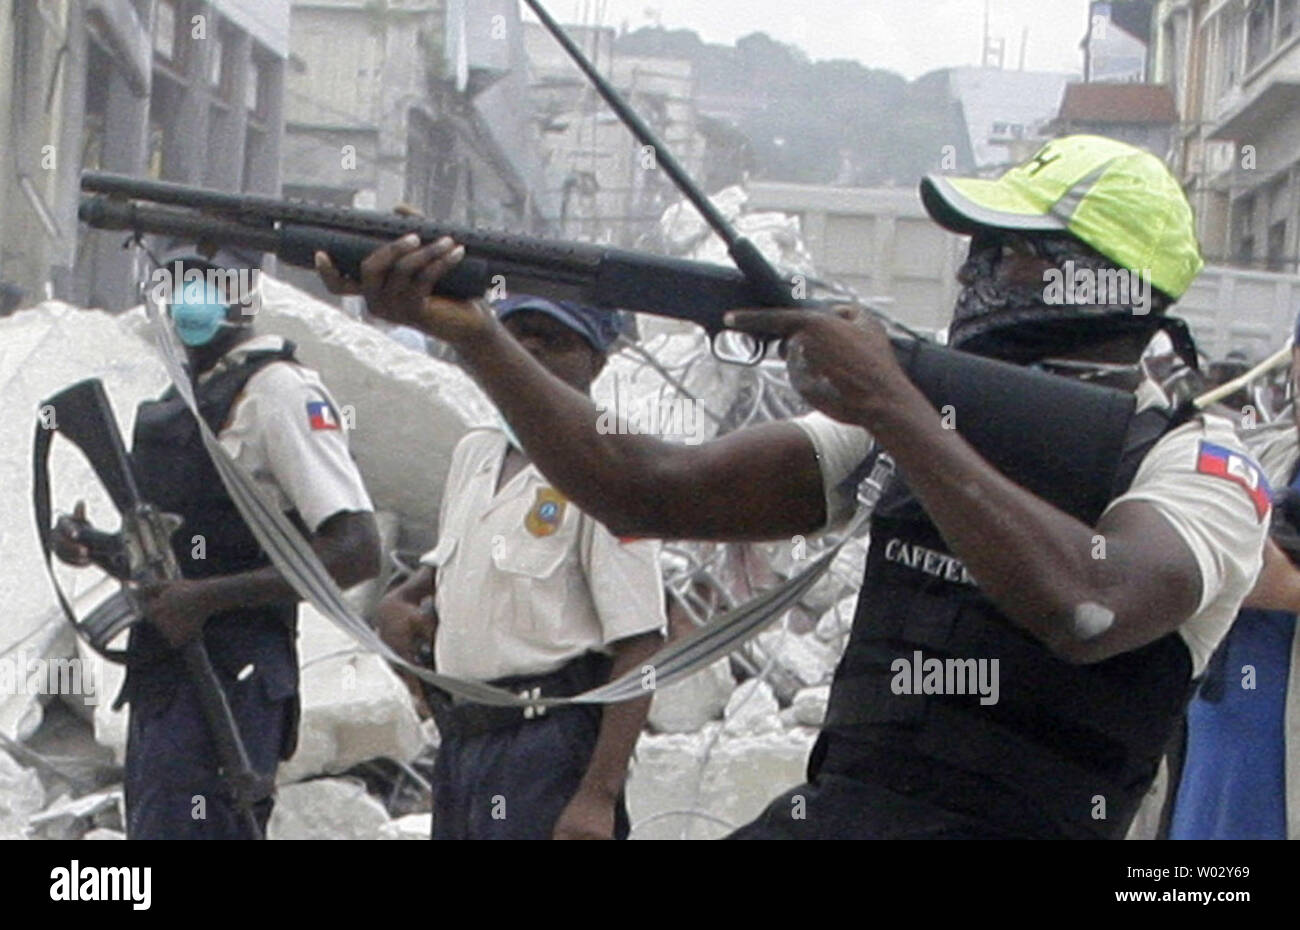 Haitian police shoot rubber bullets to stop looters in Port-au-Prince, Haiti on January 19, 2010, after a 7.0 magnitude earthquake caused severe damage on January 12. UPI/Anatoli Zhdanov Stock Photo